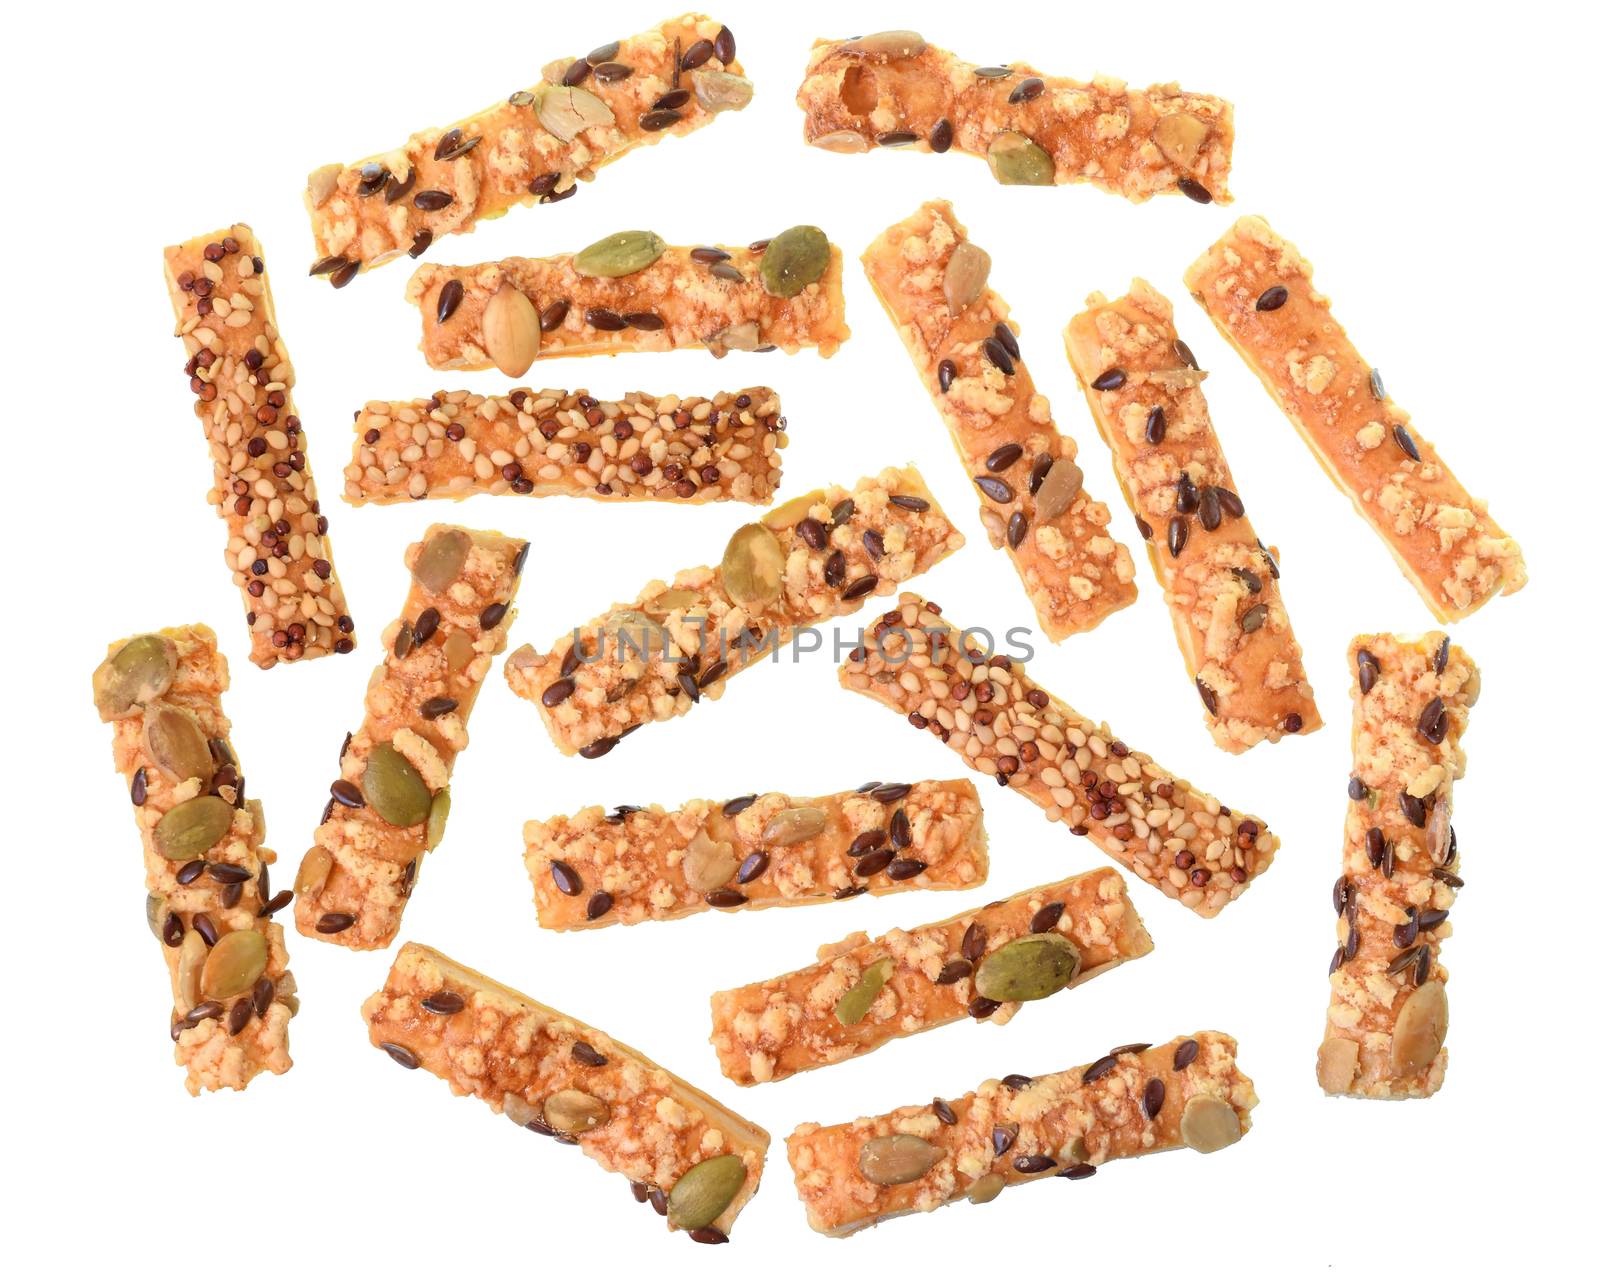 Mini seeded straws topped with cheese and seeds sunflower, pumpkin, linseeds isolated on a white background.